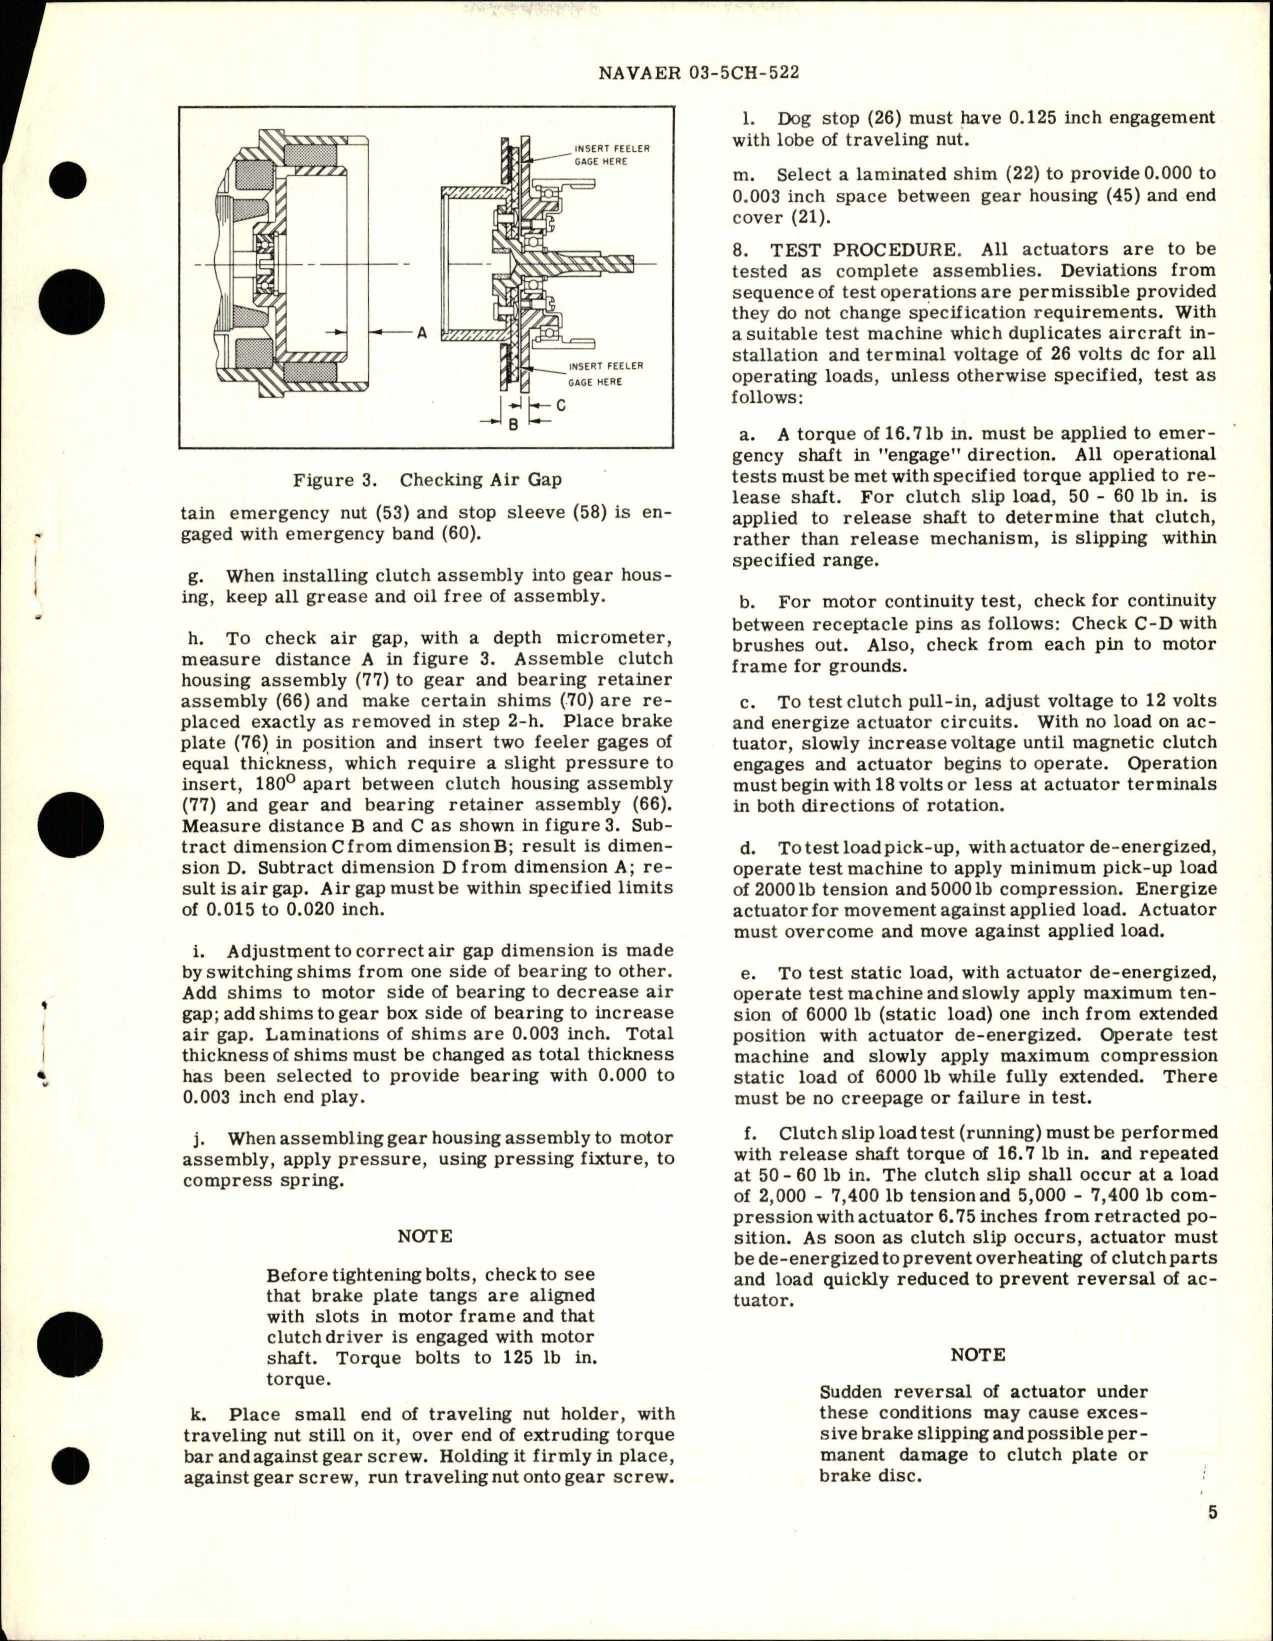 Sample page 5 from AirCorps Library document: Overhaul Instructions with Parts Breakdown for Actuator - Model A 7619-6